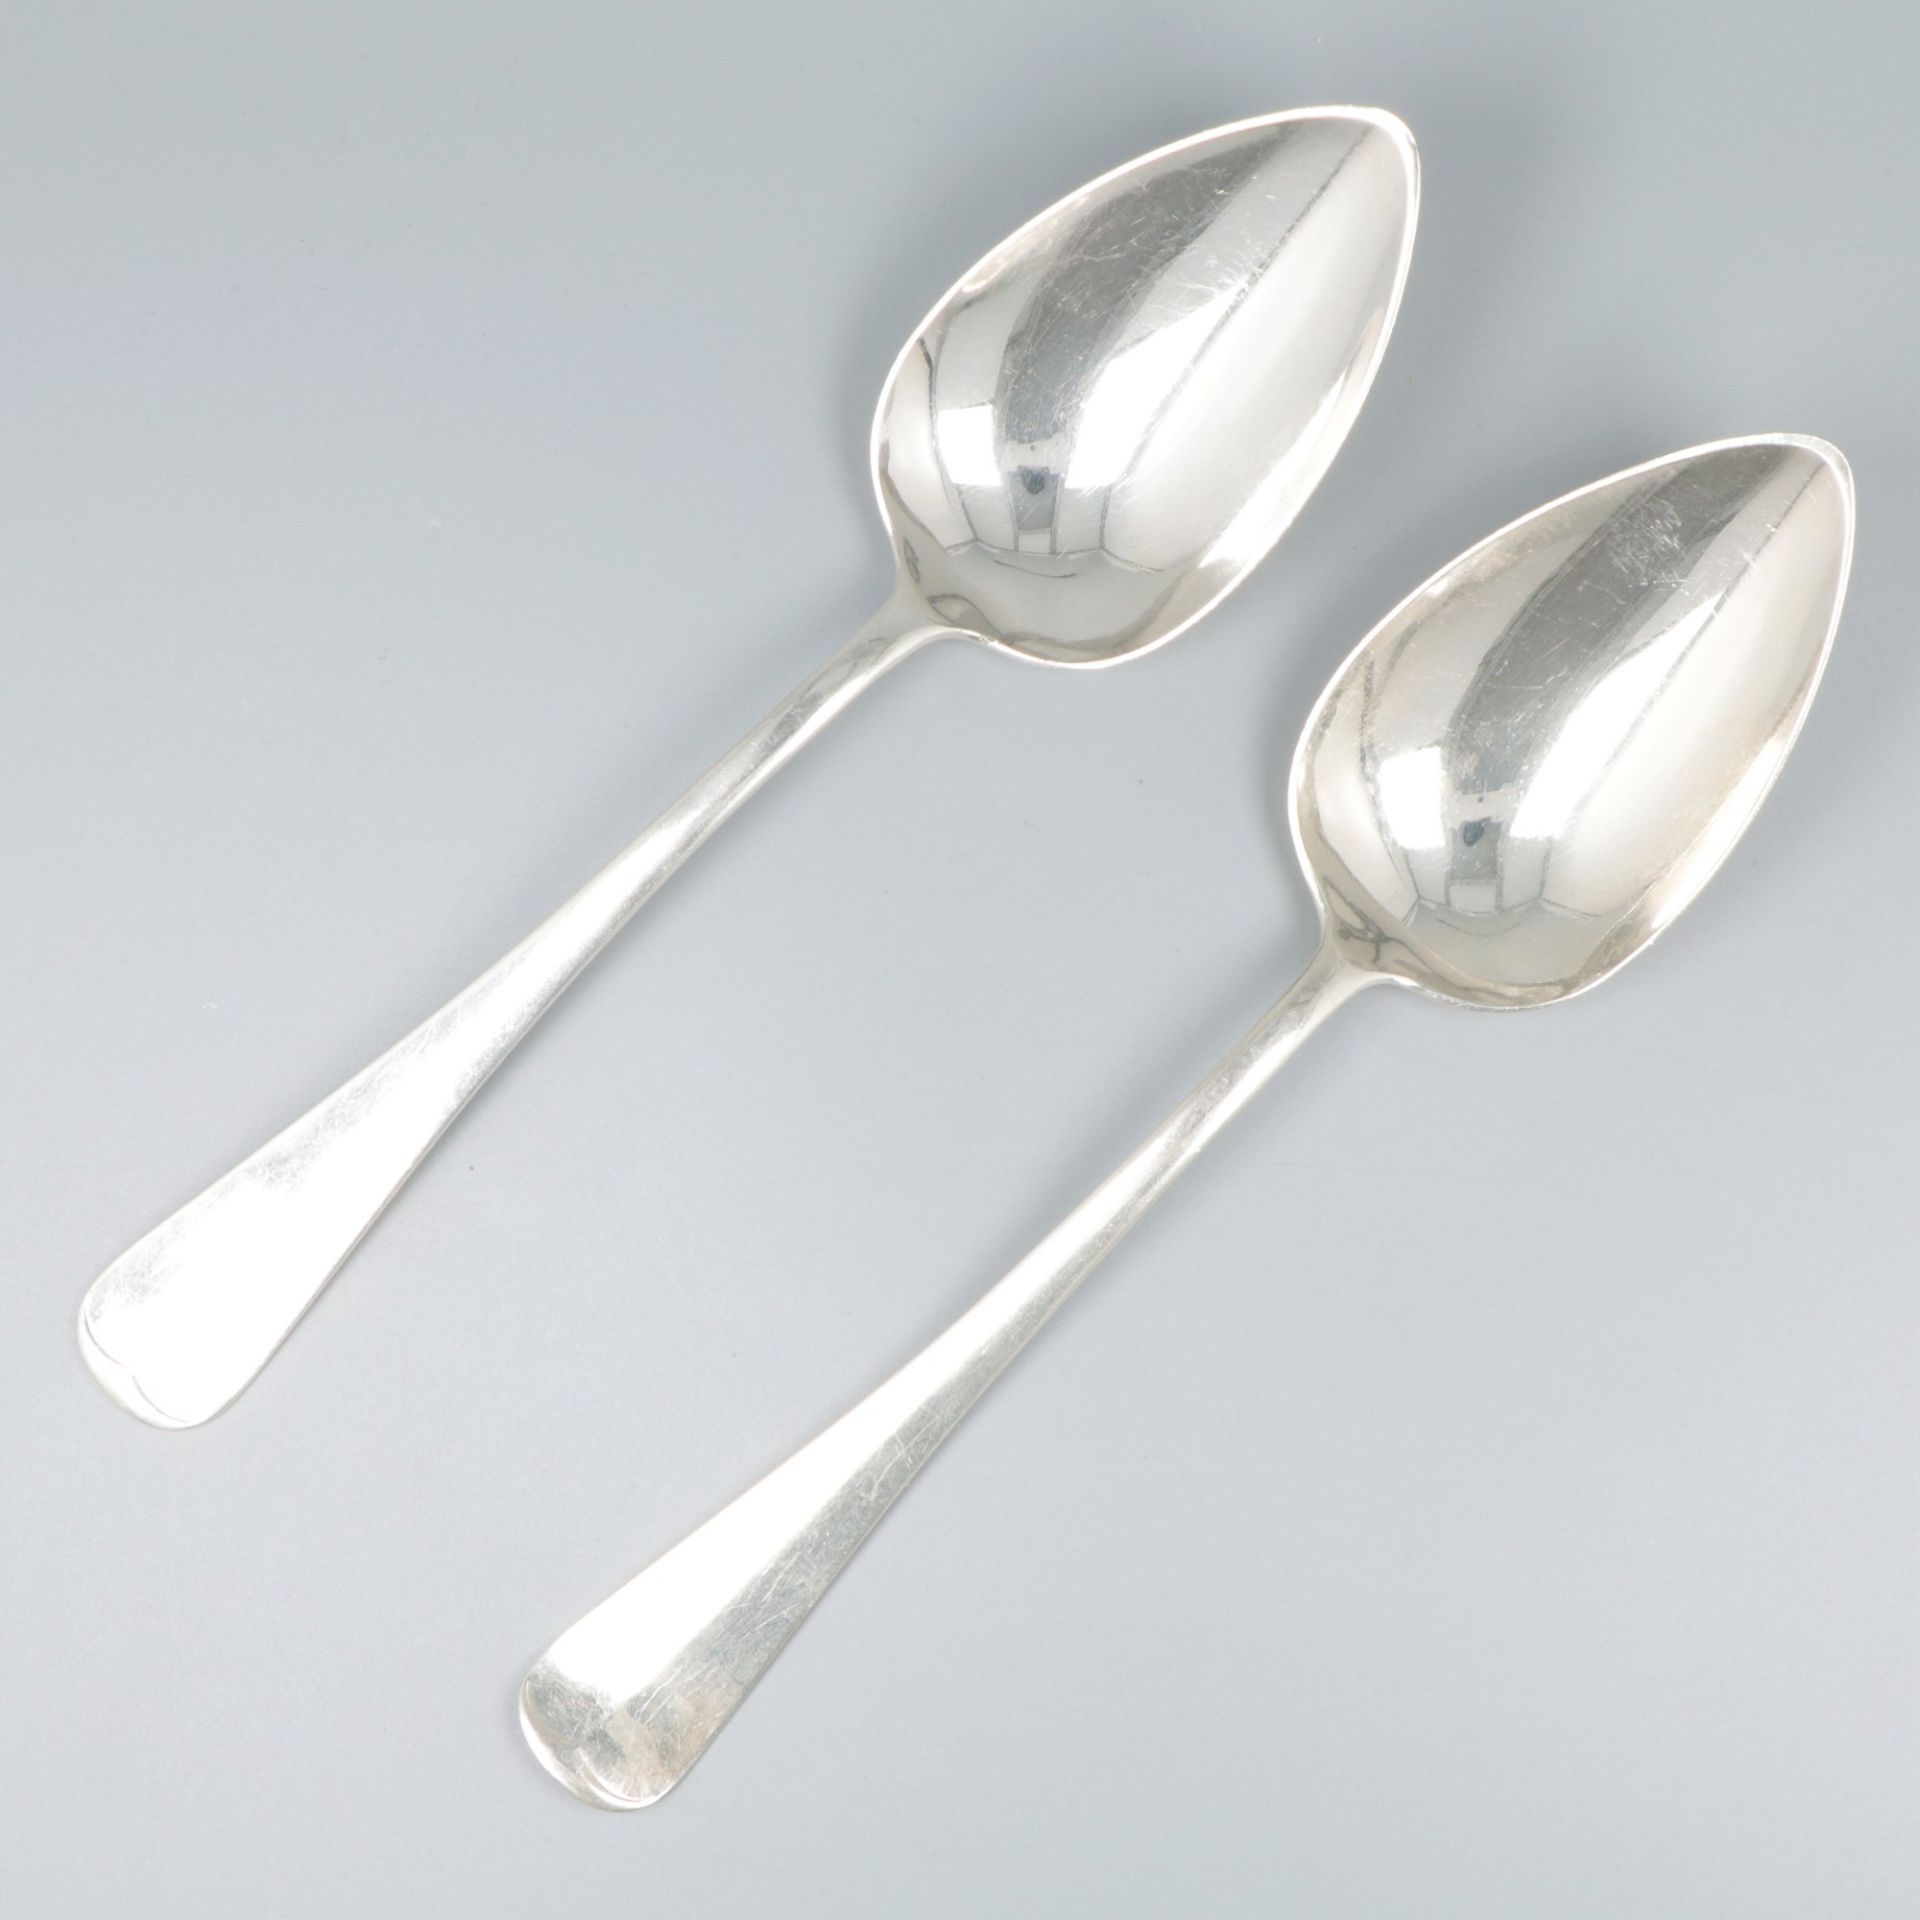 2-piece set vegetable serving spoons "Haags Lofje", silver.